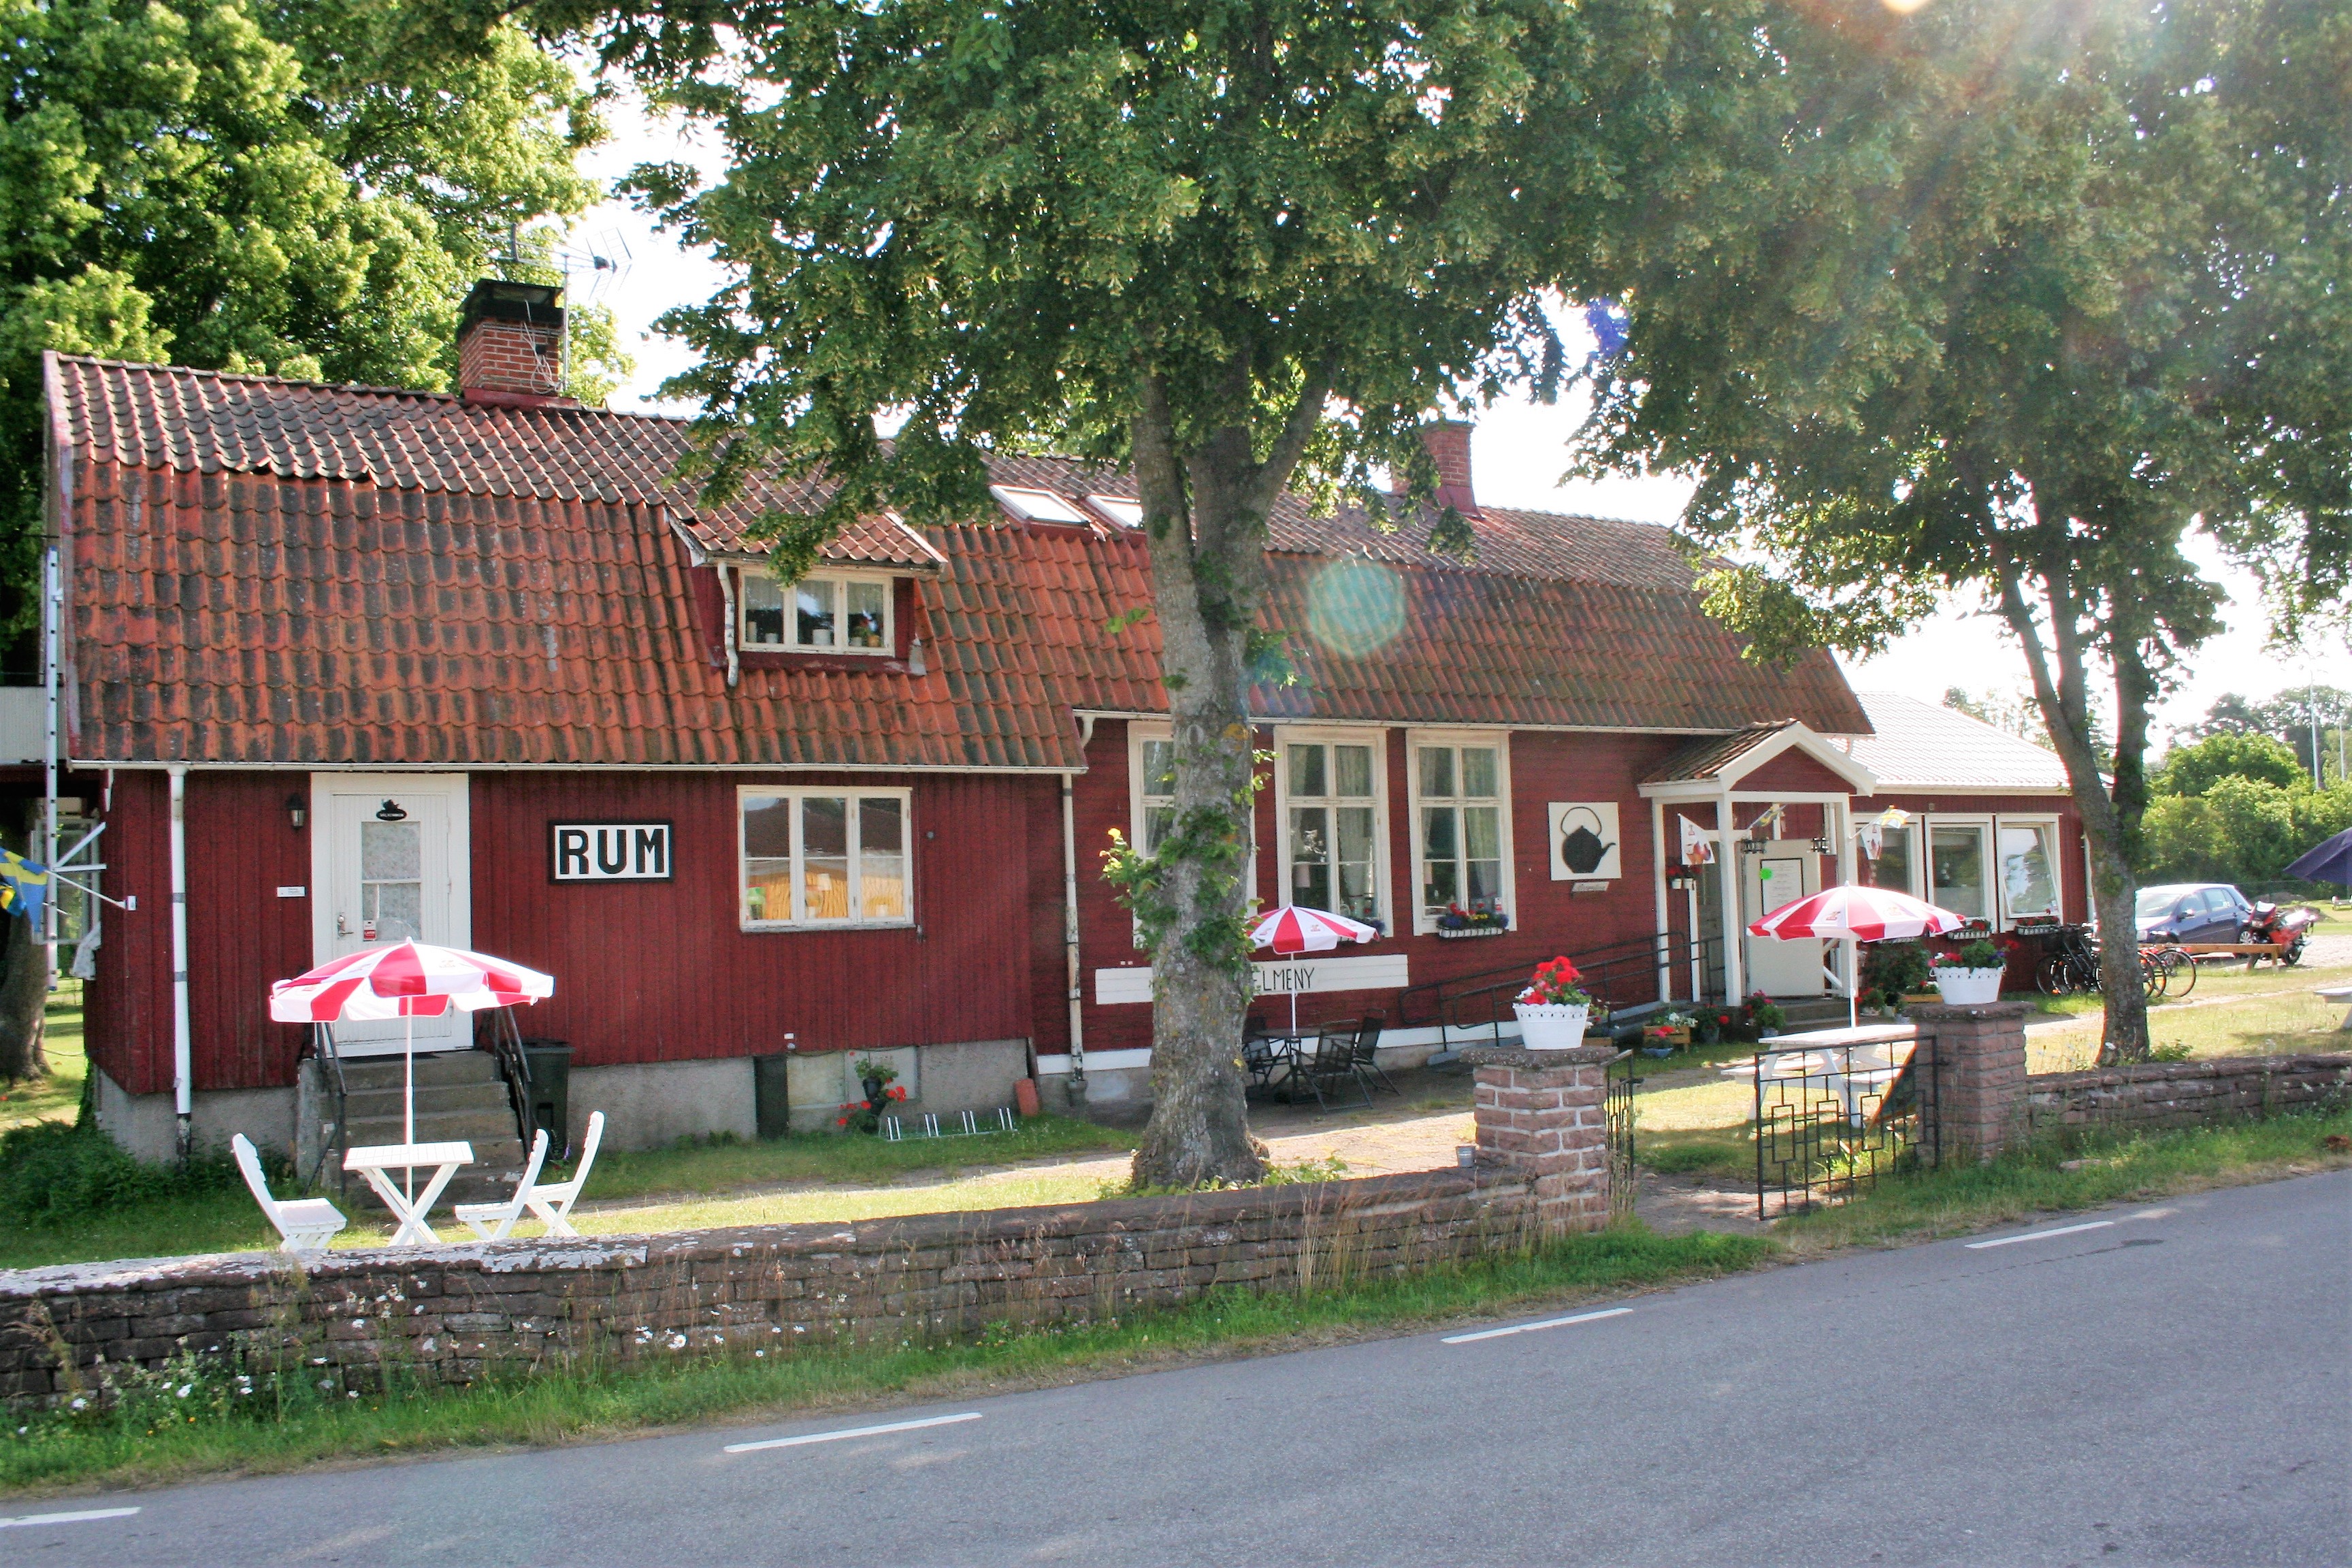 Edith & Julia Bed and Breakfast <br/>86.59 ew <br/> <a href='http://vakantieoplossing.nl/outpage/?id=686544ccf94f8a30ff0efeb33cdbf6f4' target='_blank'>View Details</a>